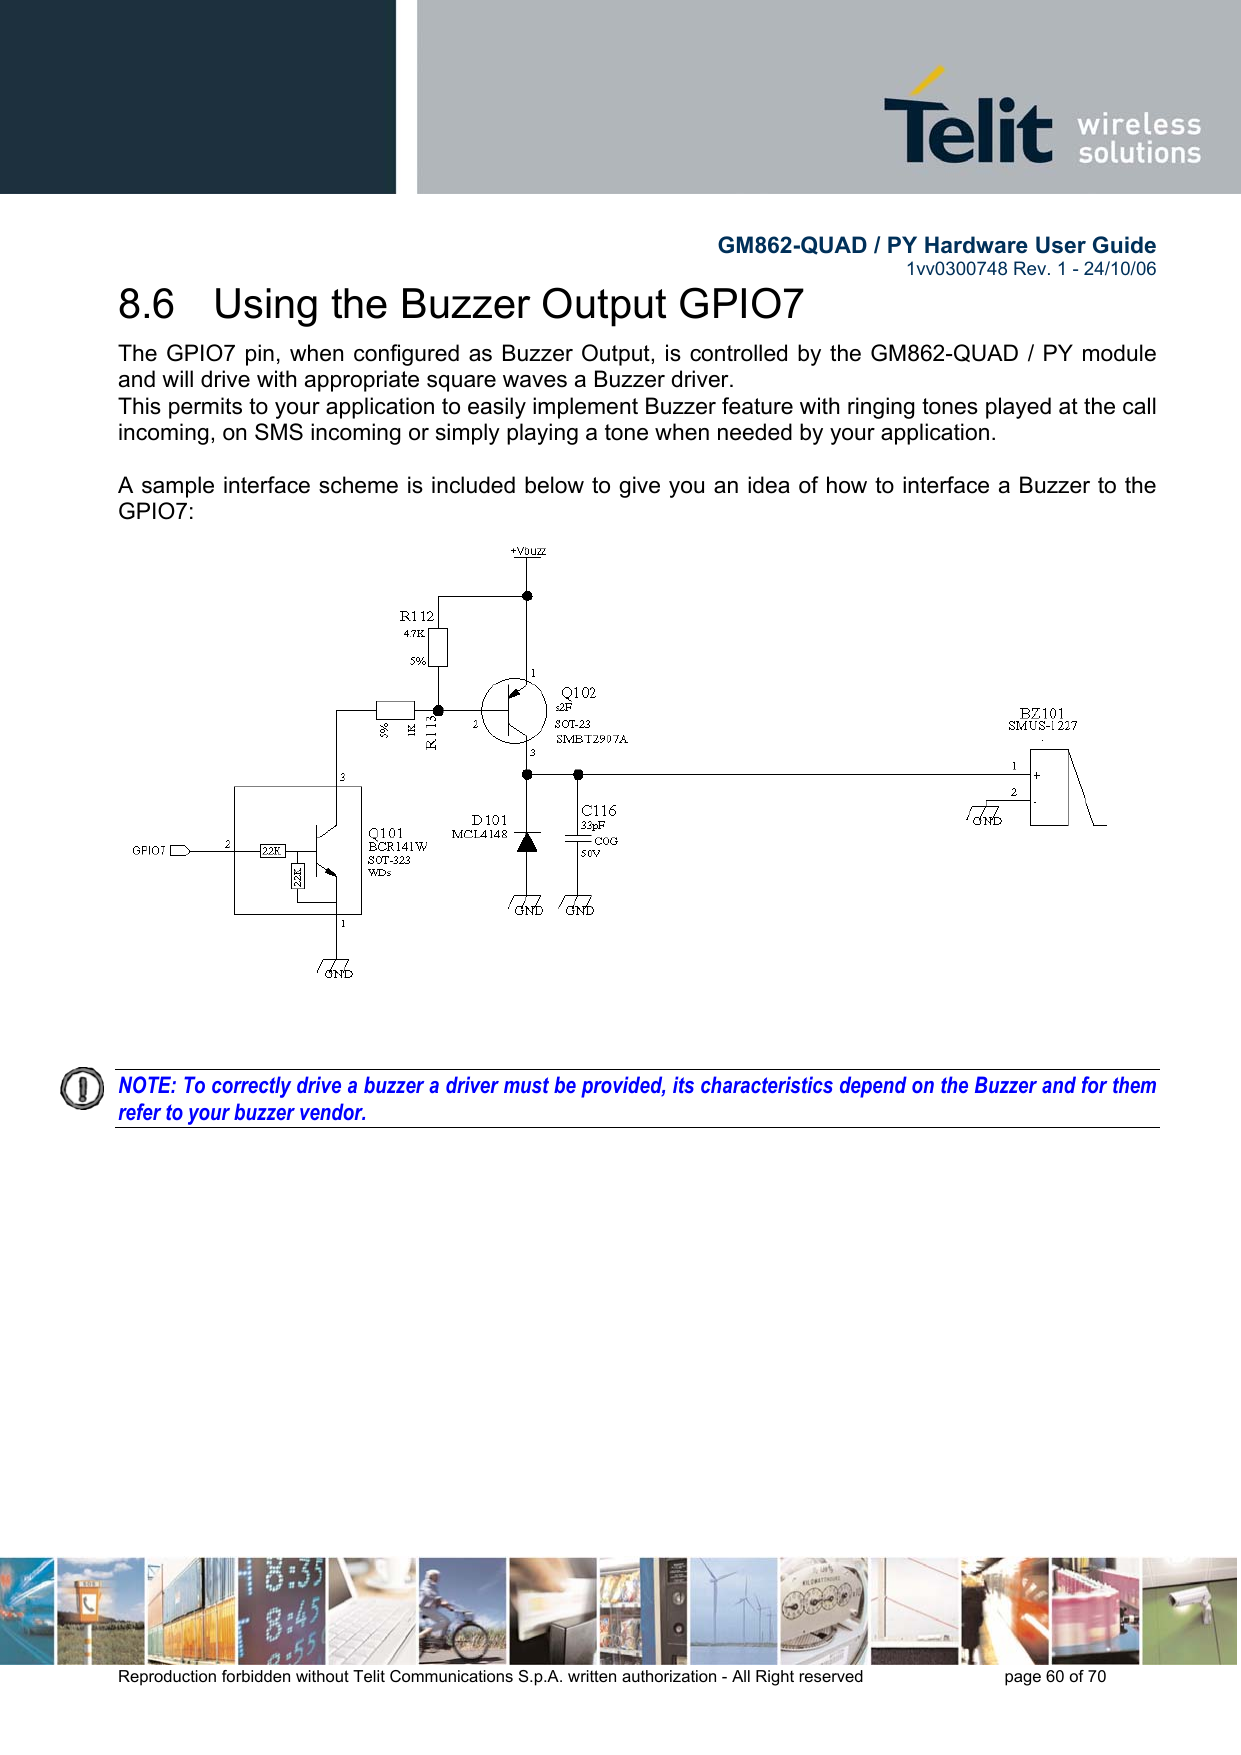        GM862-QUAD / PY Hardware User Guide   1vv0300748 Rev. 1 - 24/10/06    Reproduction forbidden without Telit Communications S.p.A. written authorization - All Right reserved    page 60 of 70  8.6   Using the Buzzer Output GPIO7 The GPIO7 pin, when configured as Buzzer Output, is controlled by the GM862-QUAD / PY module and will drive with appropriate square waves a Buzzer driver. This permits to your application to easily implement Buzzer feature with ringing tones played at the call incoming, on SMS incoming or simply playing a tone when needed by your application.  A sample interface scheme is included below to give you an idea of how to interface a Buzzer to the GPIO7:    NOTE: To correctly drive a buzzer a driver must be provided, its characteristics depend on the Buzzer and for them refer to your buzzer vendor.   